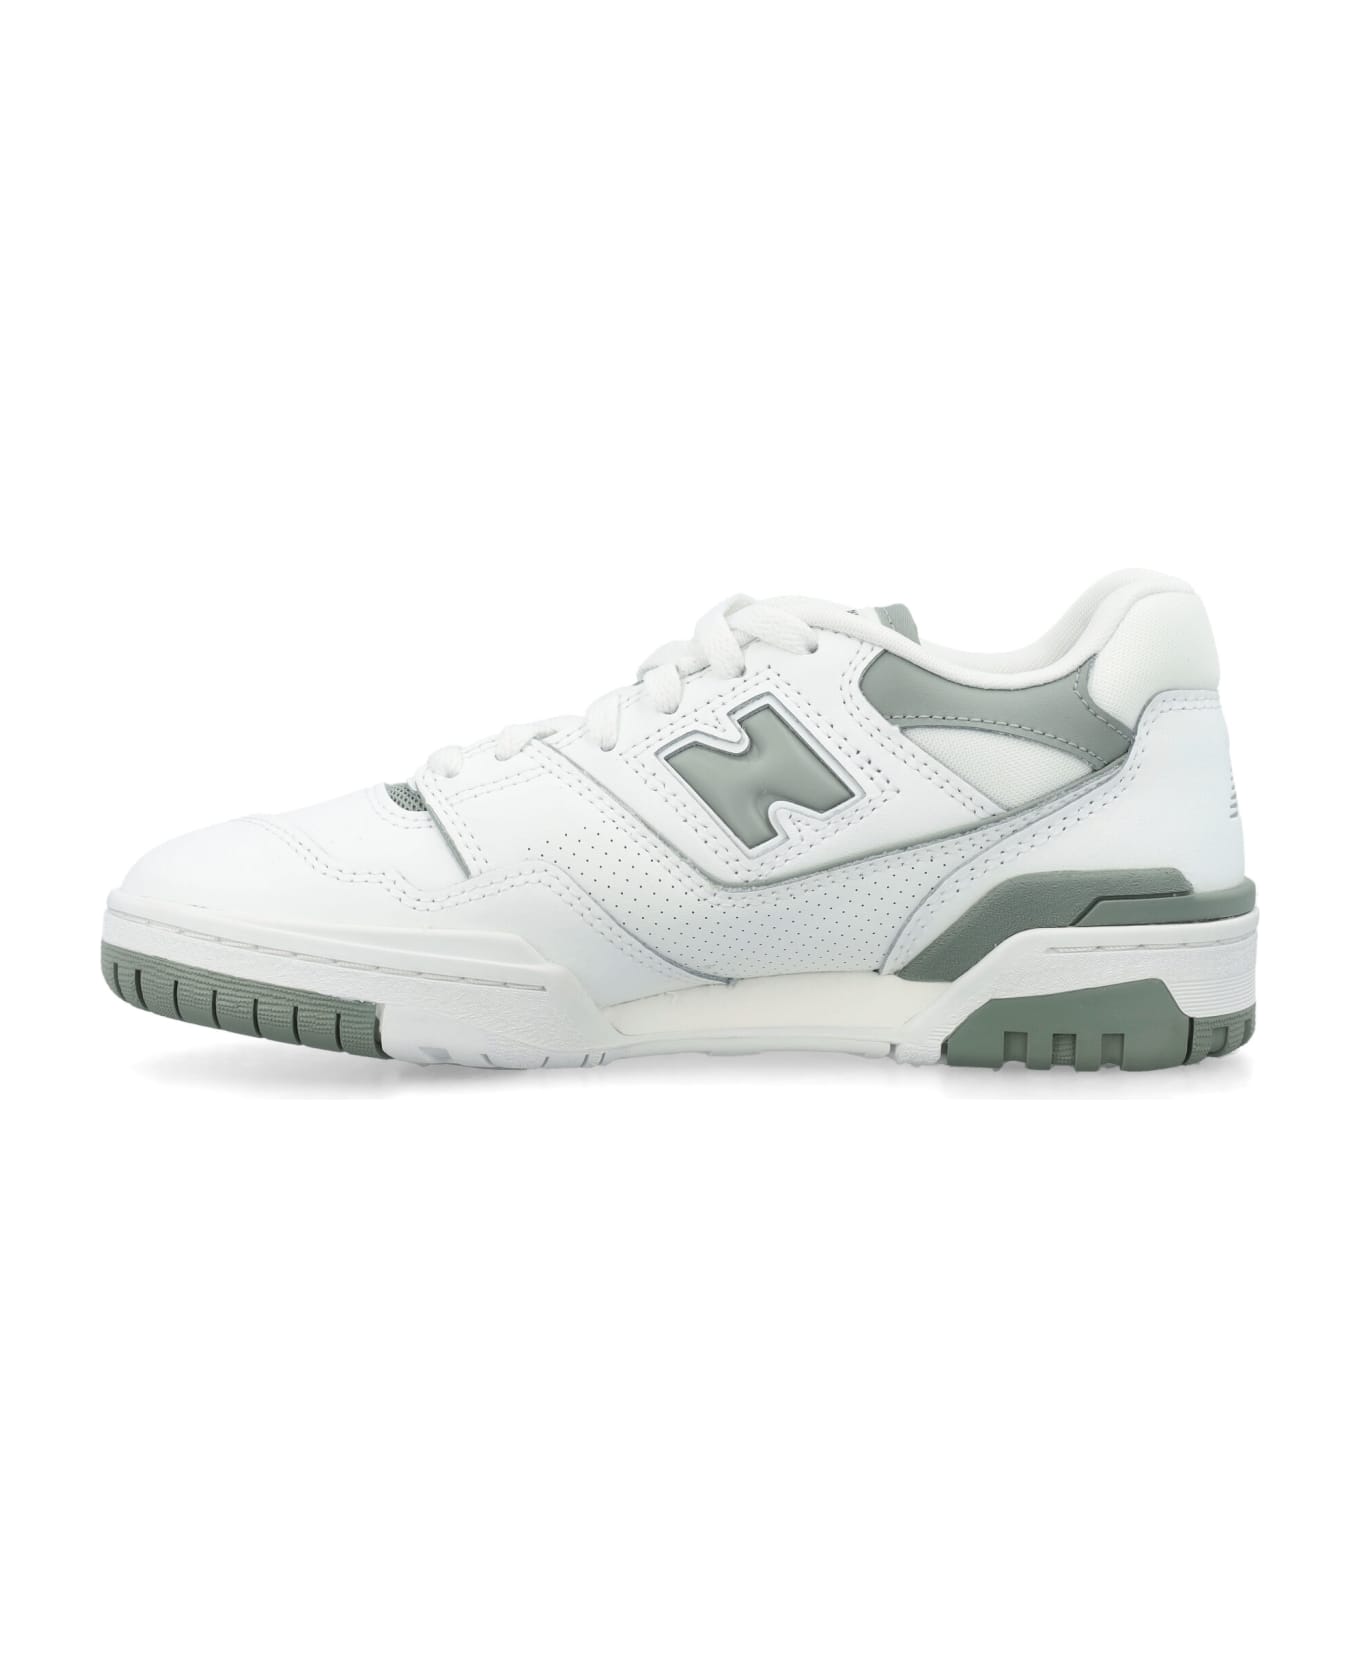 New Balance 550 Woman's Sneakers - WHITE GREEN